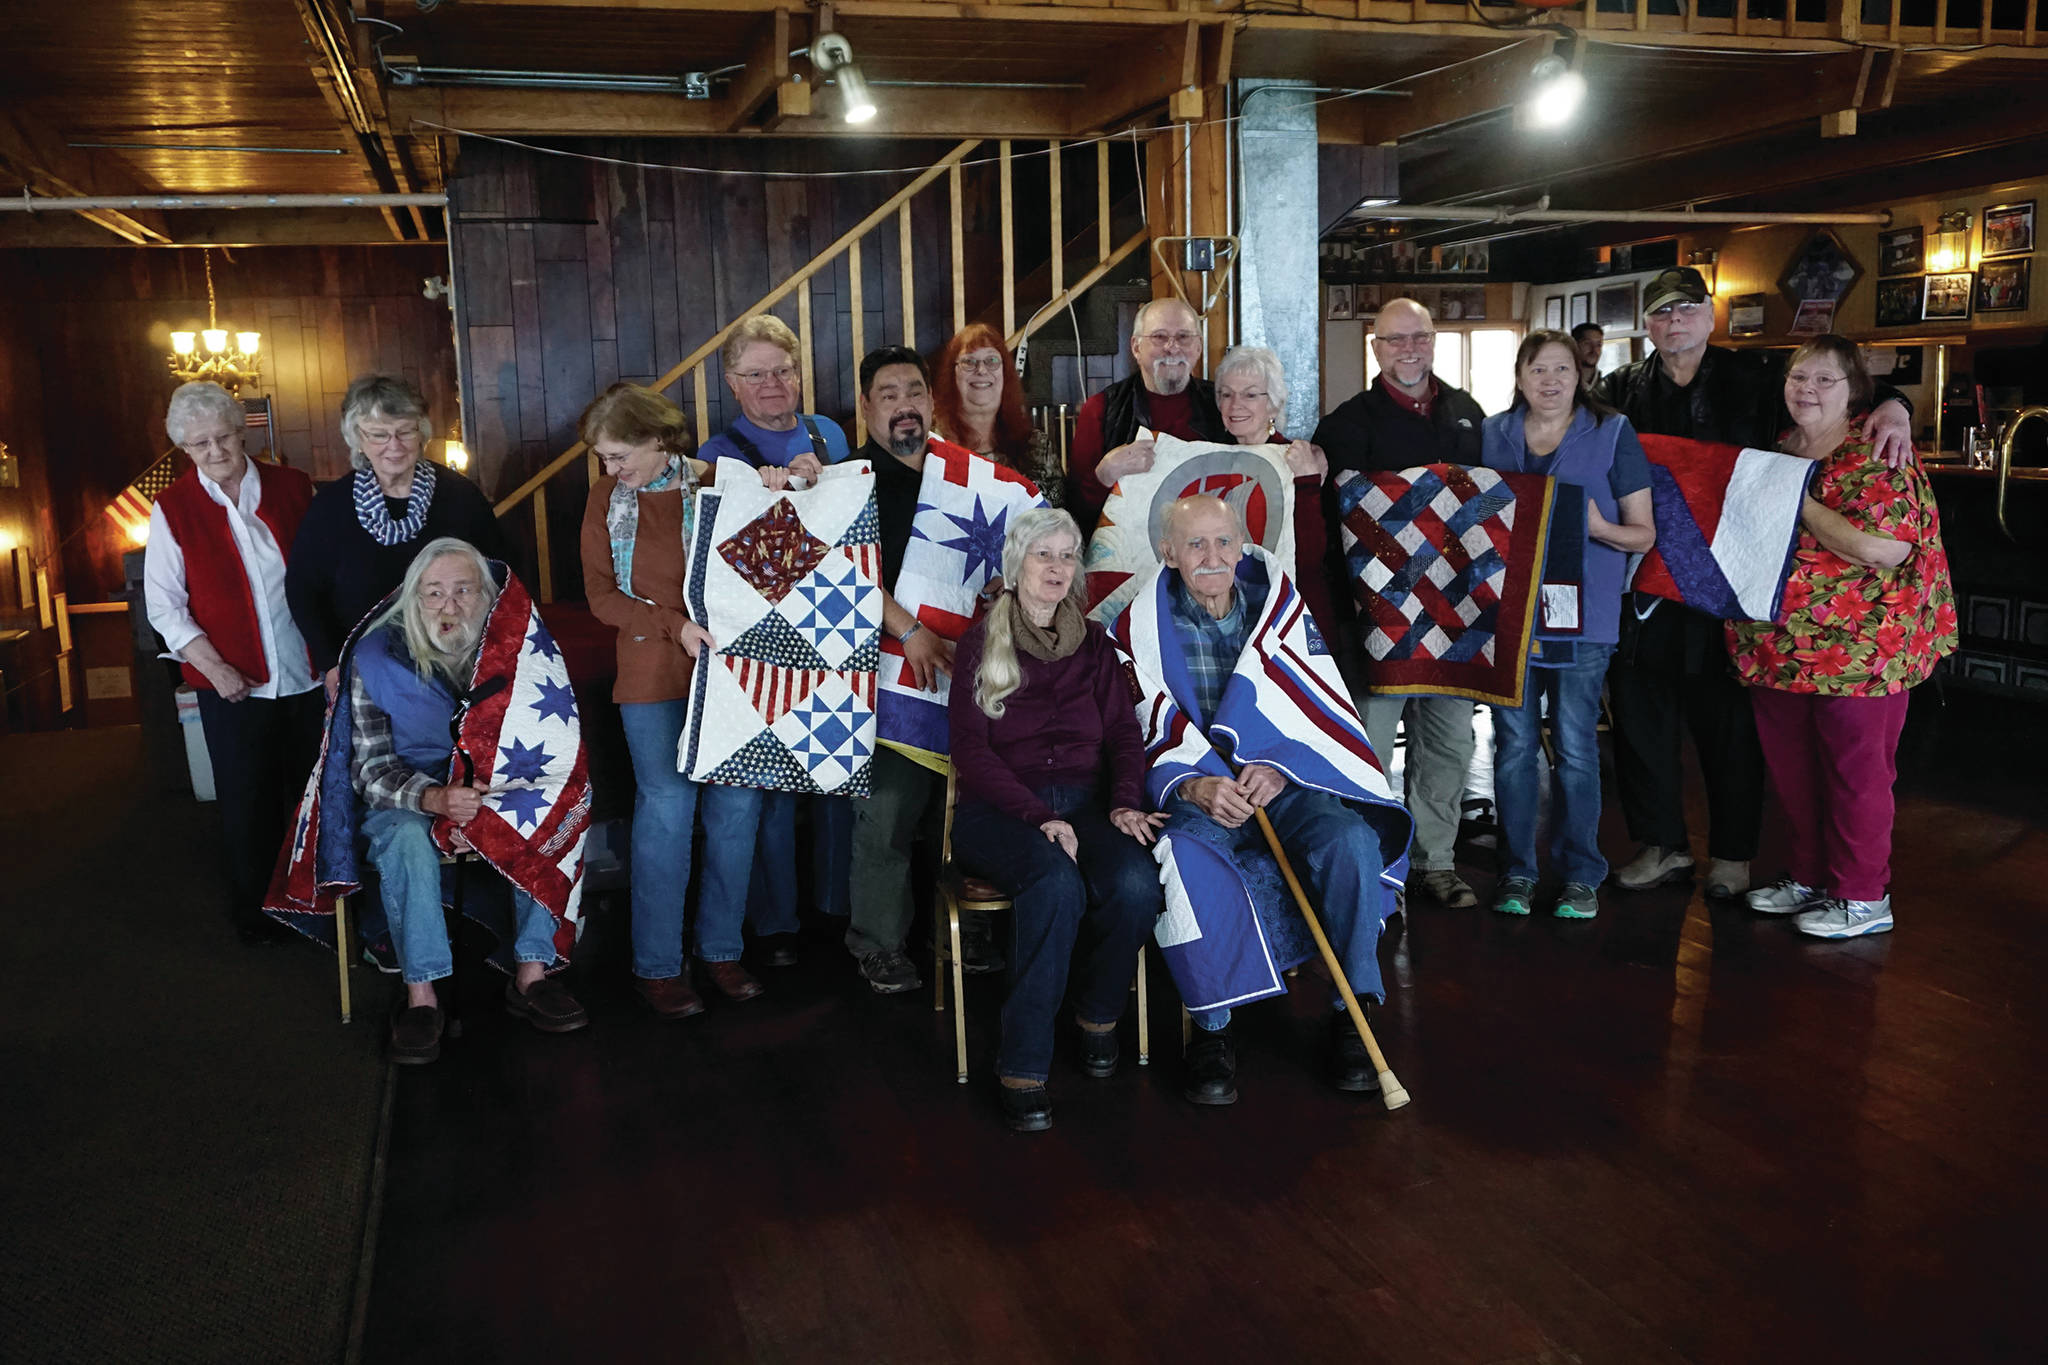 Veterans who received Quilts of Valor pose for a photograph at the Veterans Day lunch held at the Elks Lodge on Nov. 11, 2019, in Homer, Alaska. The quilts were made by the Kachemak Bay Quilters and presented as part of the national Quilts of Valor project. Since being founded by Catherine Roberts in 2003 while her son was deployed in Iraq, the program has given more than 235,000 quilts to military veterans, with almost 2,000 awarded in Alaska. Veterans who received quilts are, seated at left, John Benya; fifth from left, Troy Wise; sixth from left, Robert “R.J.” Carlough; eighth from left, Norman Mosher; ninth from left, in chair, Thomas Youngblood; fourth from right, Robert Fimon; and second from right, Nicholas Varney. (Photo by Michael Armstrong/Homer News)